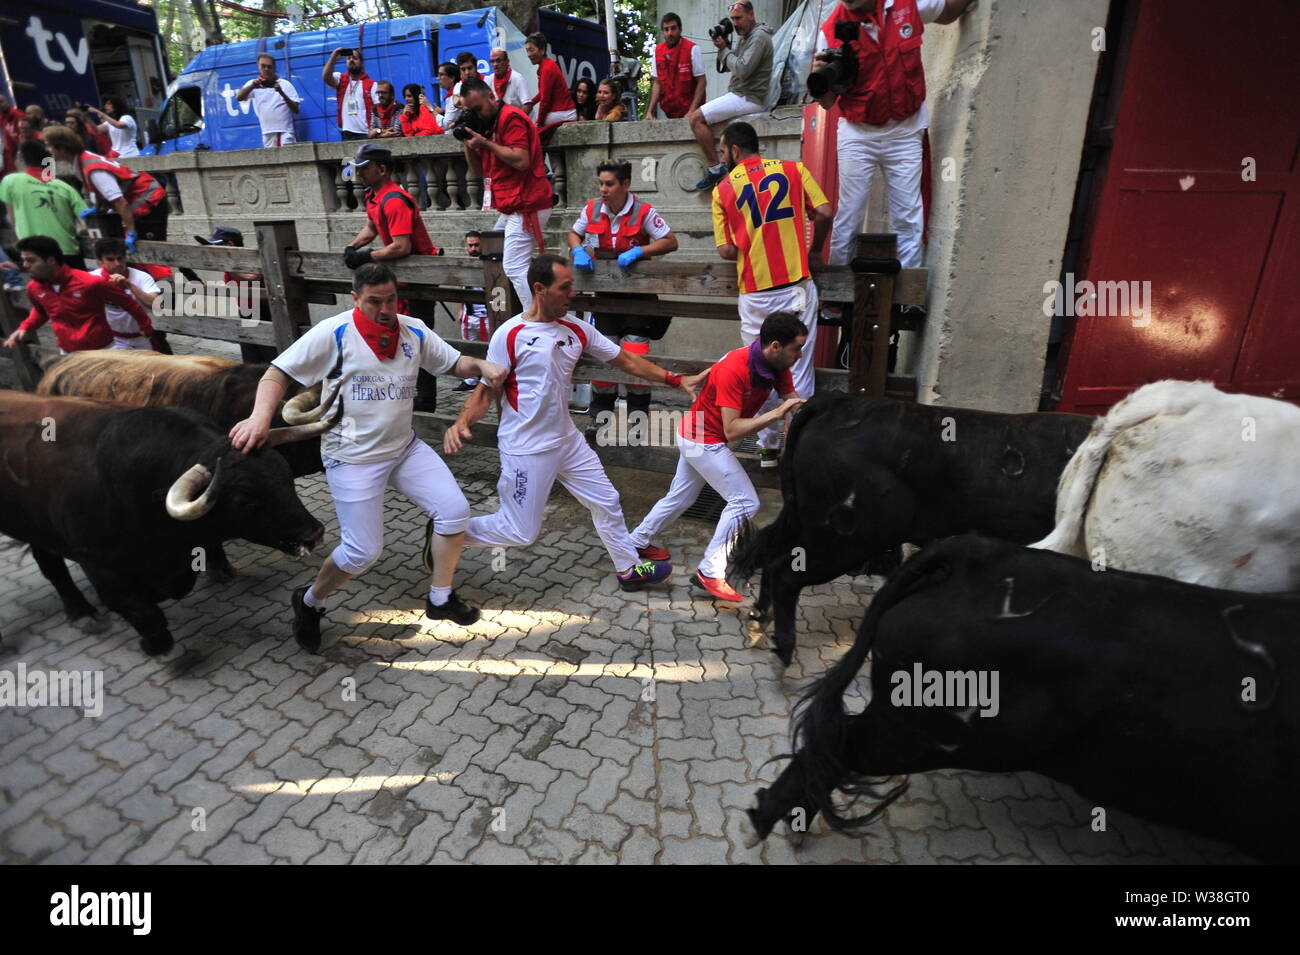 People run from the bulls during the festivities.San Fermín festivities celebrate the confinement of the bulls of the cattle ranch. The Palmosilla (run of the bulls), was settled with no one injured by a bull horn and the morning hours passed with the visit of the big heads to the house of Misericordia making a fun morning among the elderly. Stock Photo